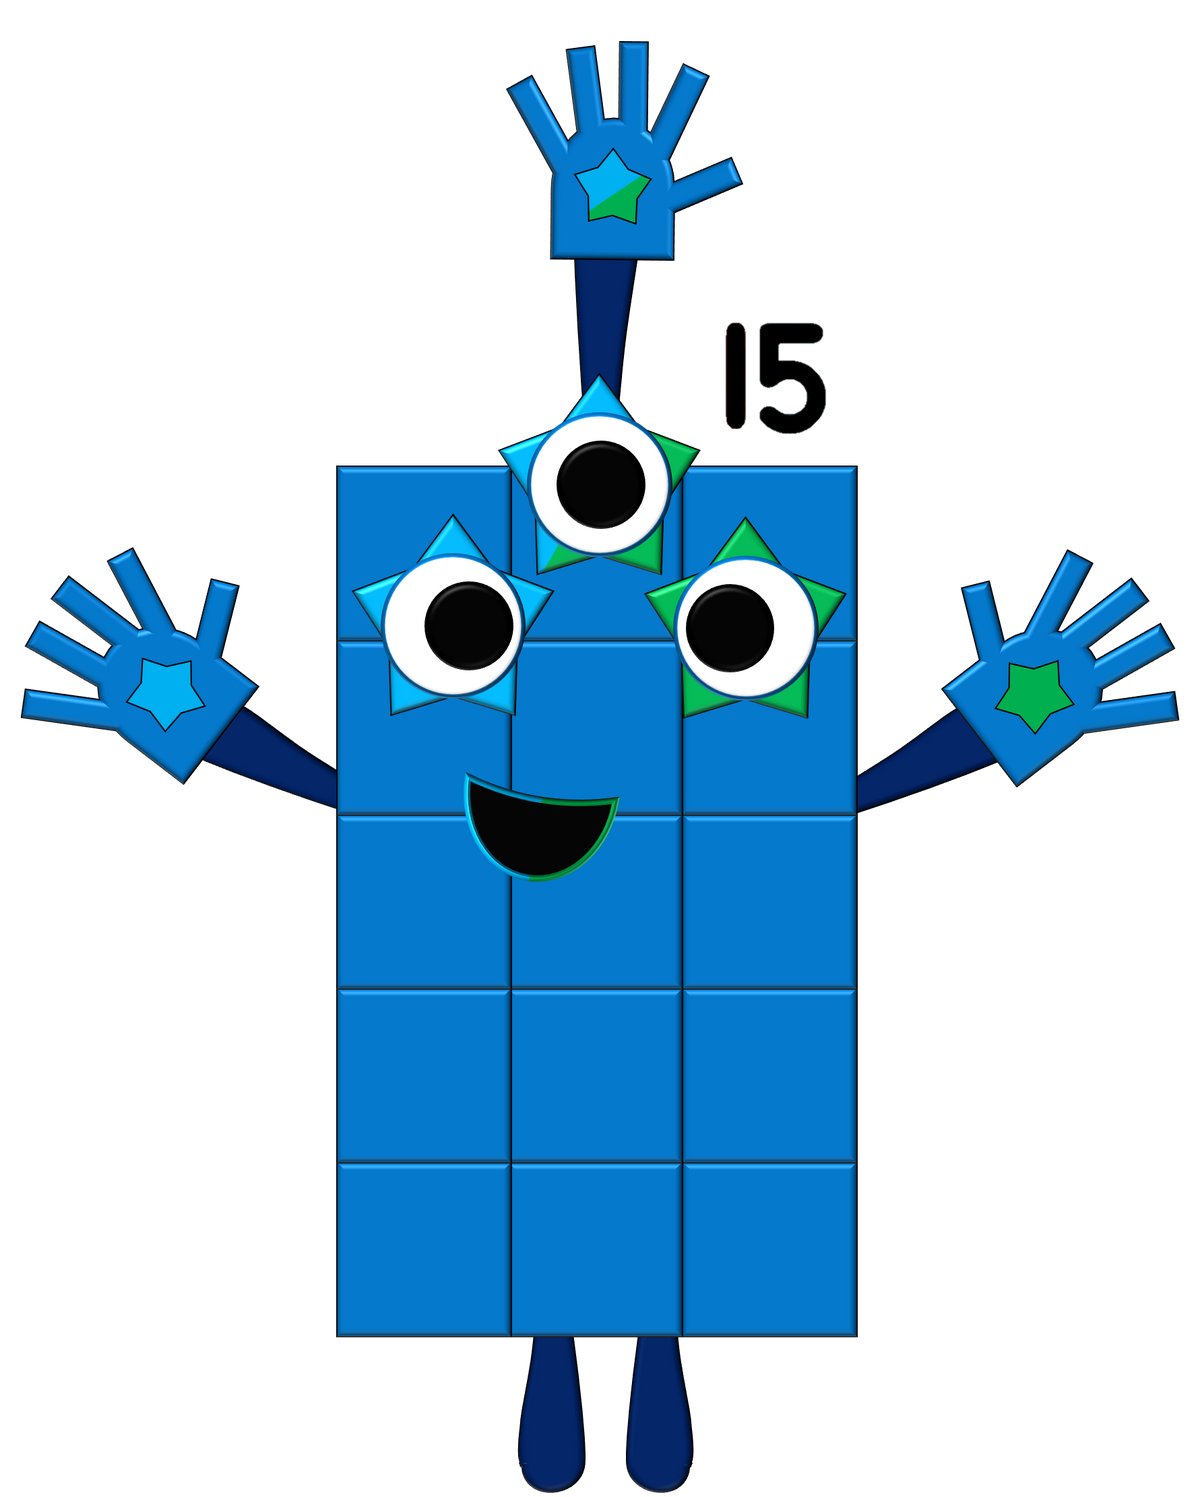 Colourblocks (characters)/Fanmade Gallery, Numberblocks Wiki